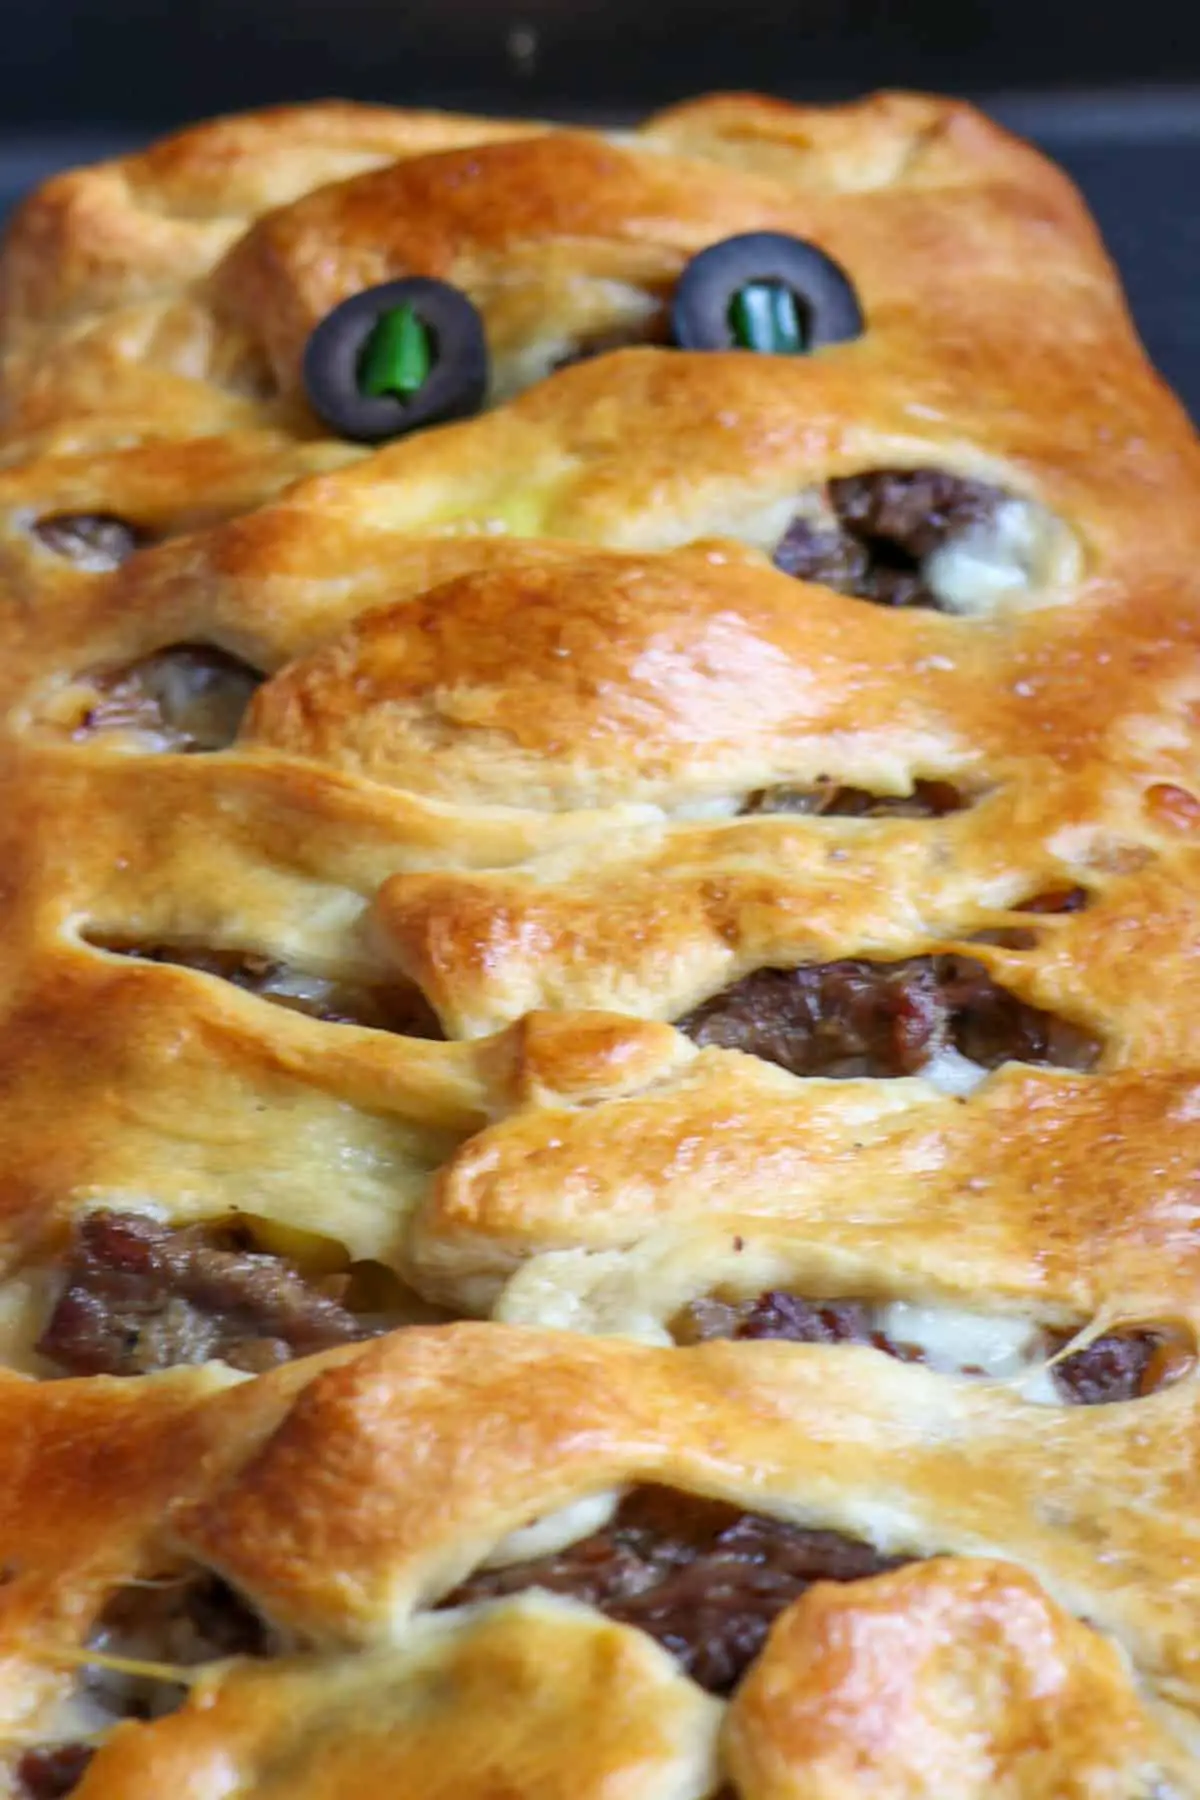 Sliced rib eye steak wrapped with cooked crescent roll dough that has been cut into 1 inch intervals and placed on top of the sliced meat to resemble mummy wrappings and eyes made of black olives with green onions as pupils.